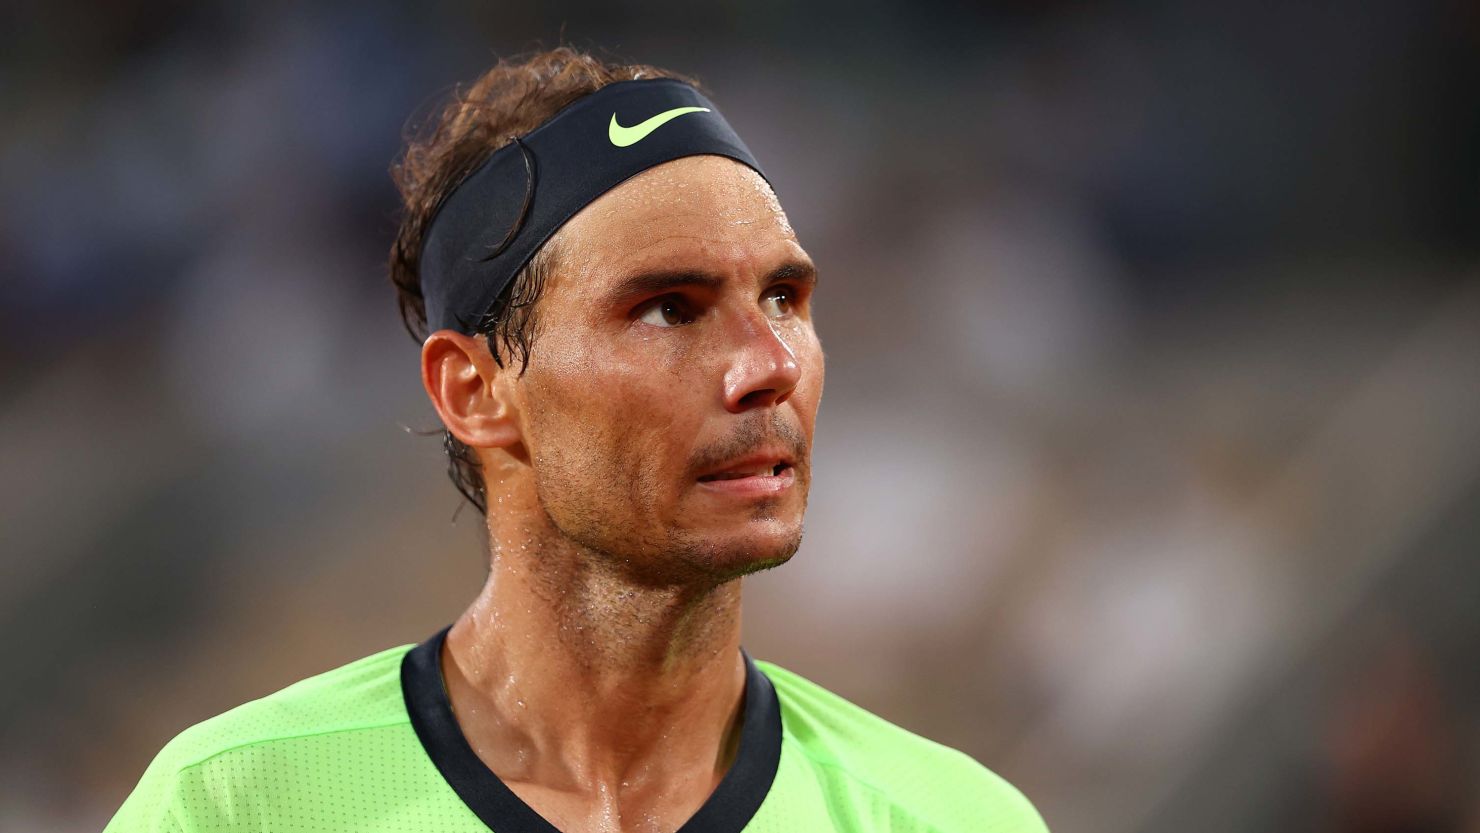 Breaking news: Ahead of ‘crucial’ semi-final clash against Daniel Medvedev, Rafael Nadal announce his intention to…